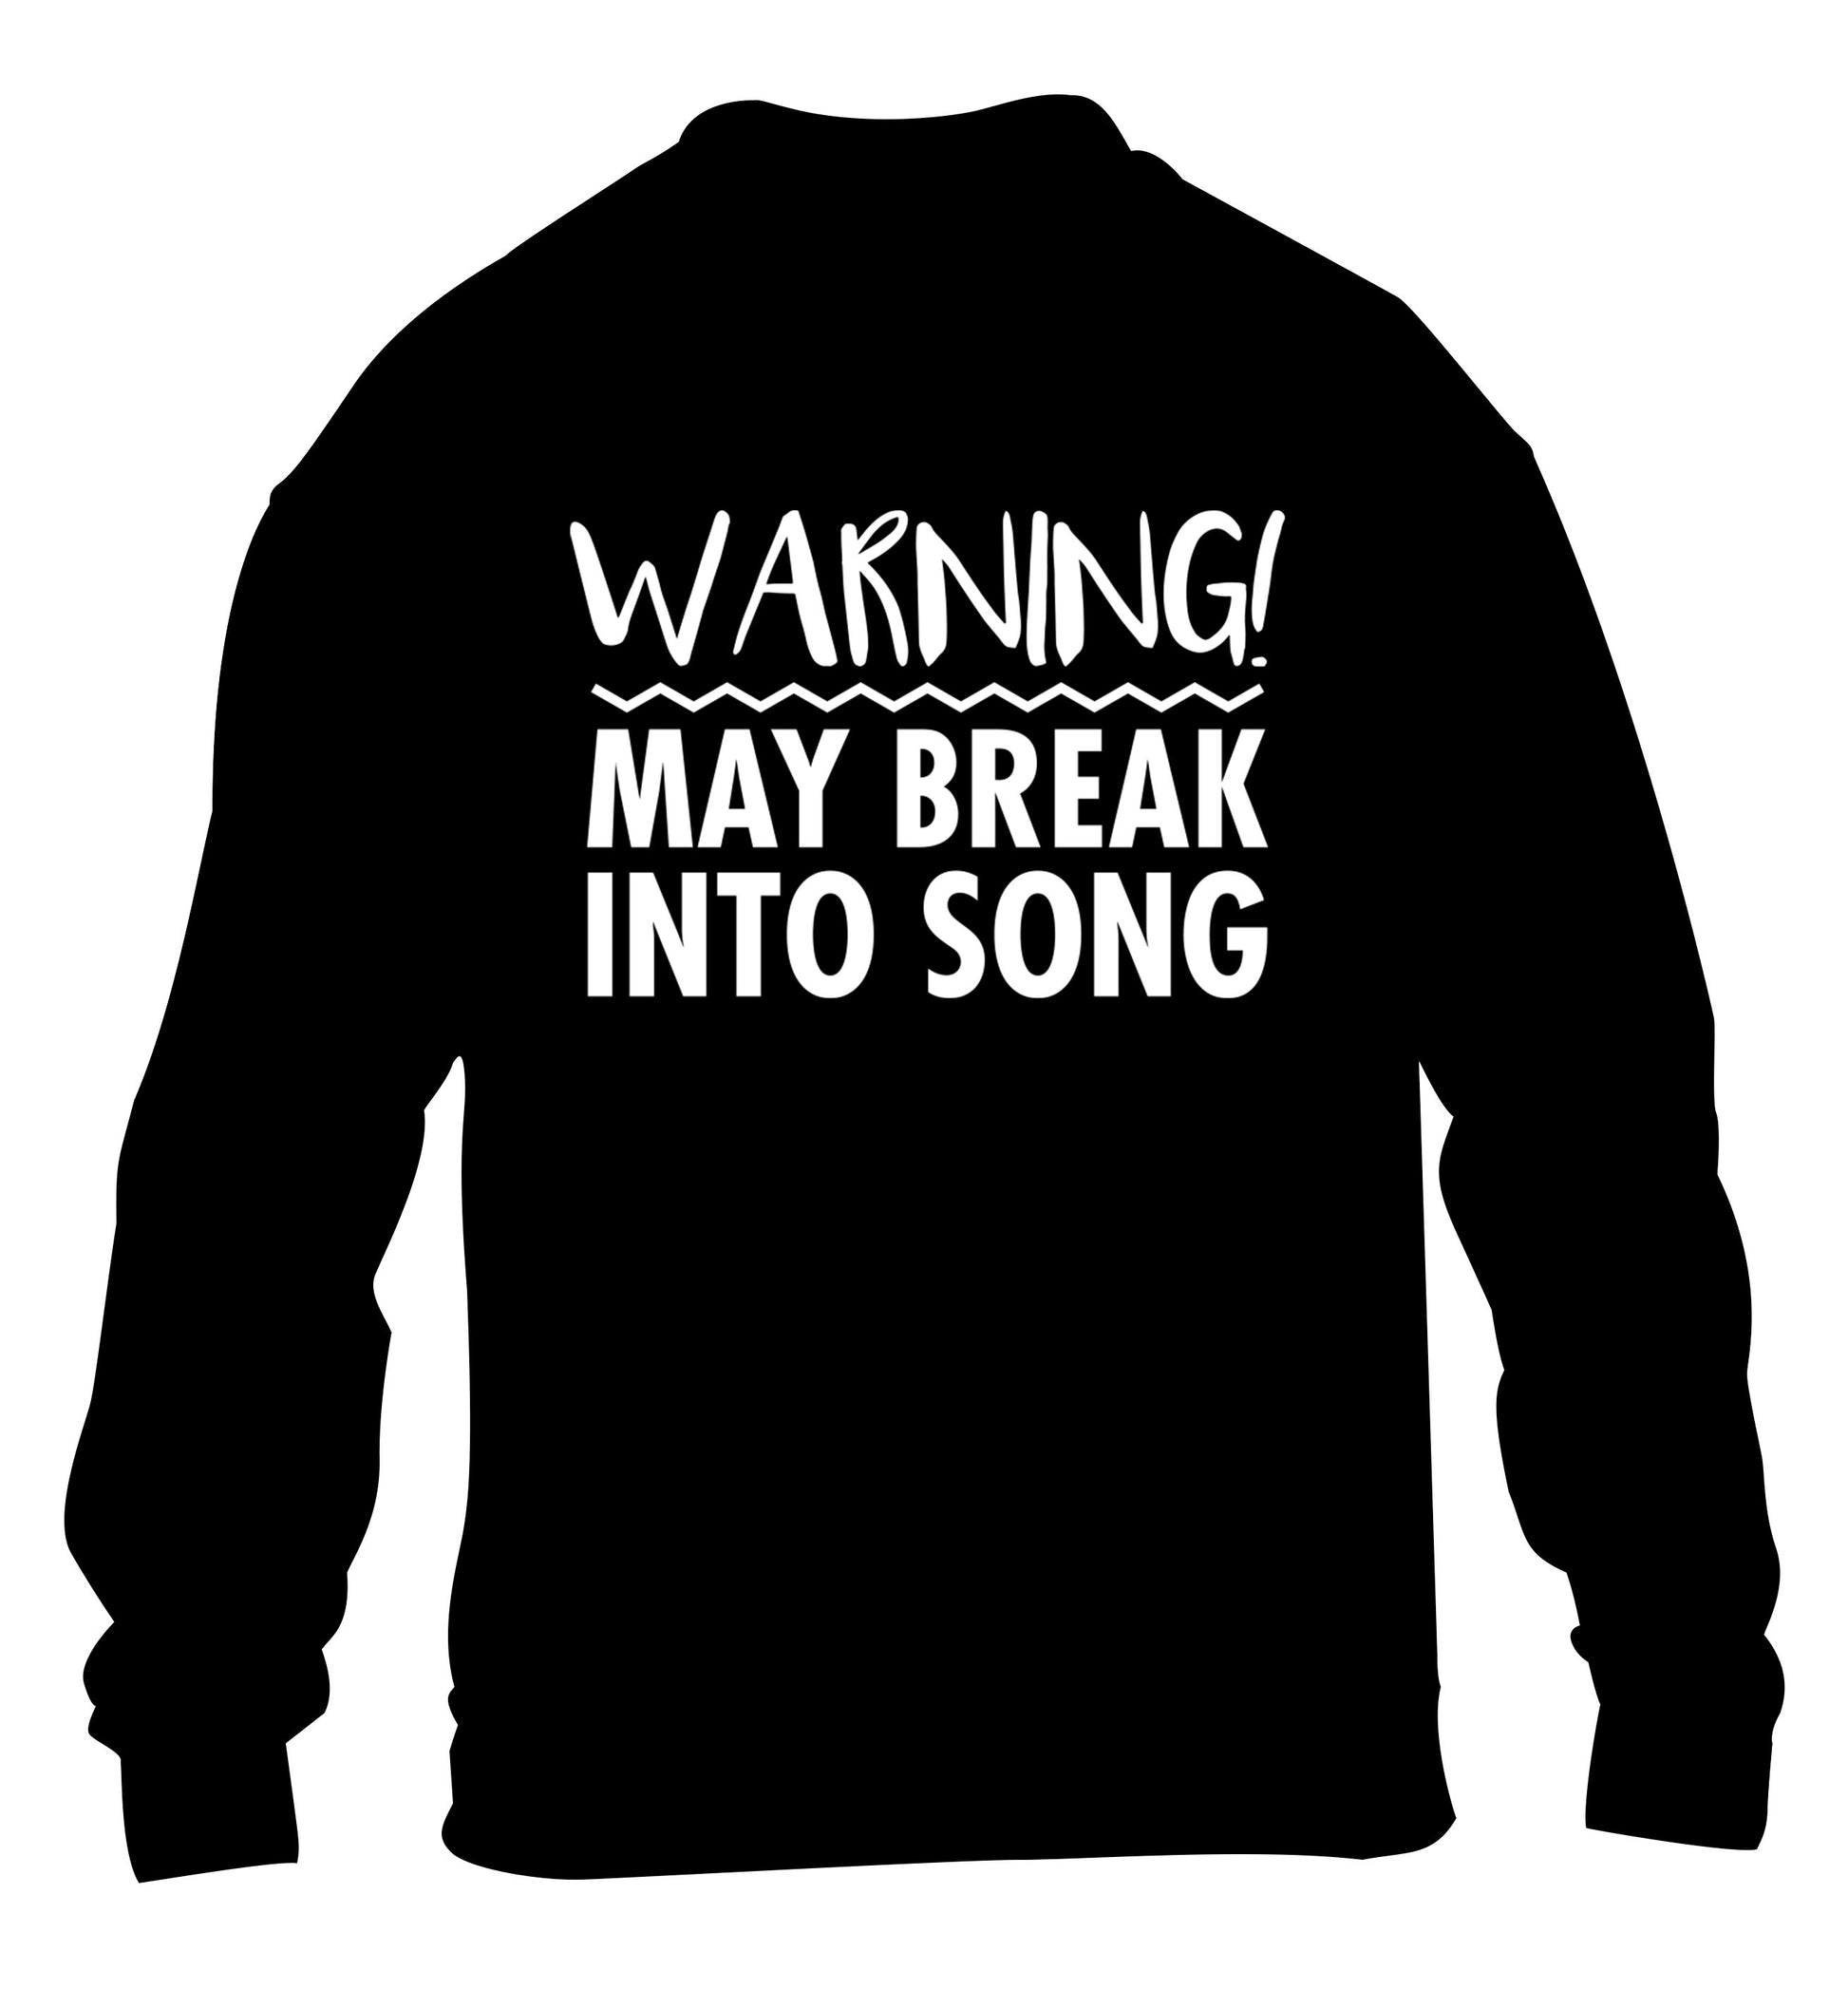 Warning may break into song children's black sweater 12-14 Years